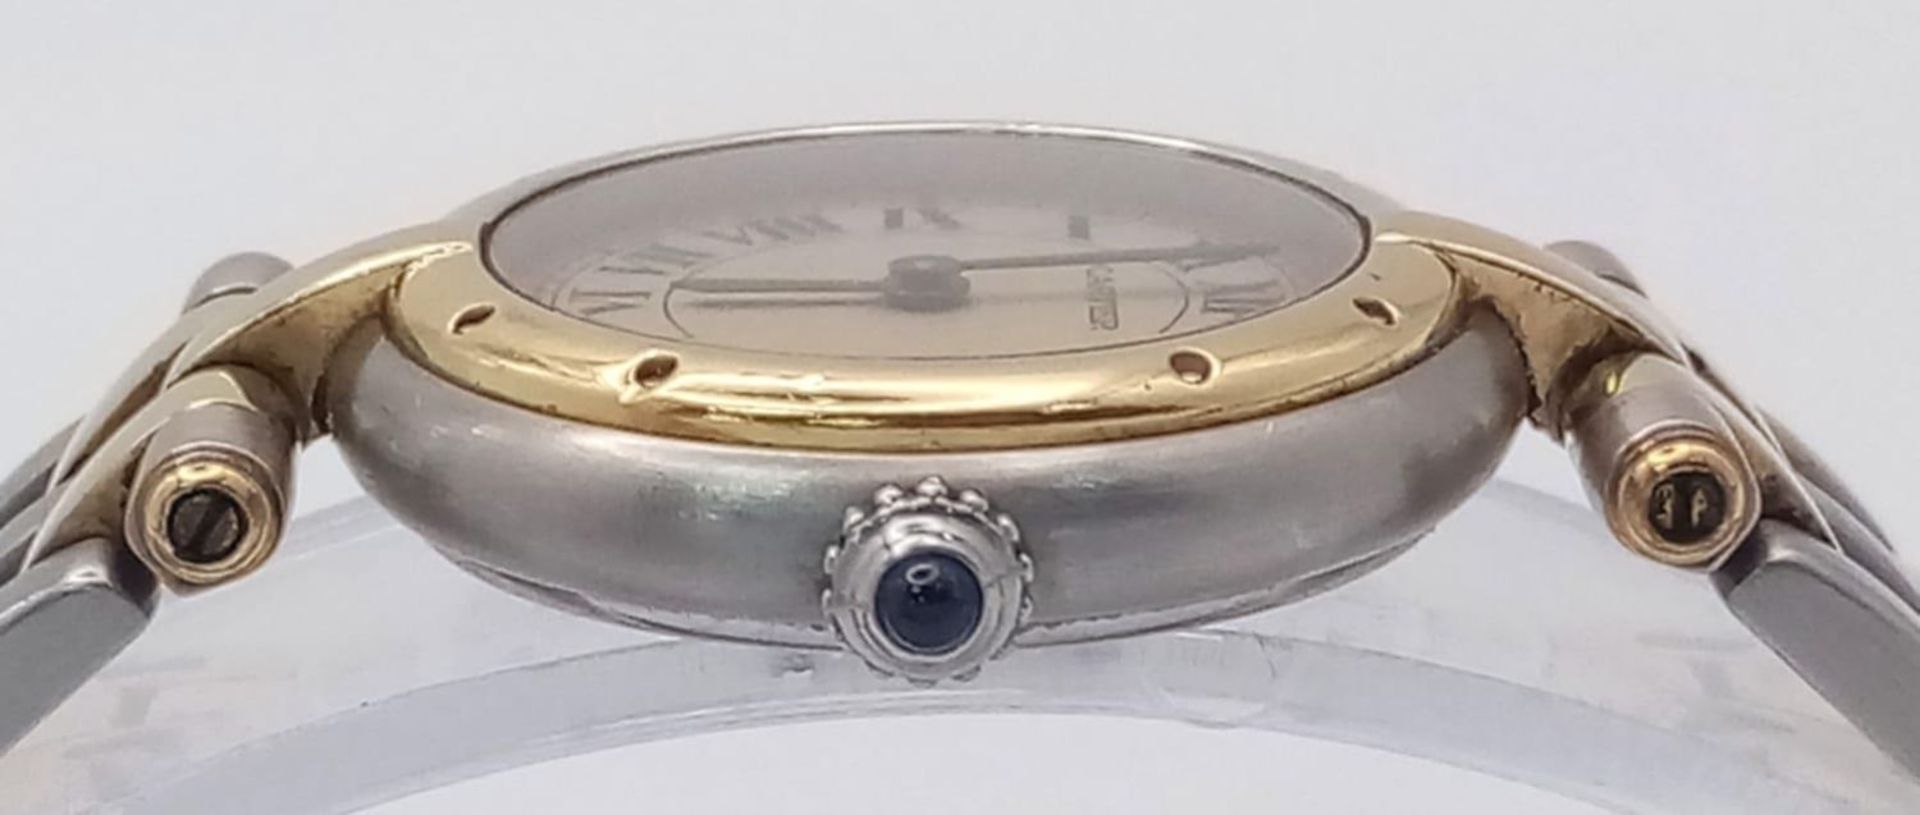 A Vintage Cartier Panthere Quartz Ladies Watch. Bi-metal (gold and stainless steel) bracelet and - Image 11 of 18